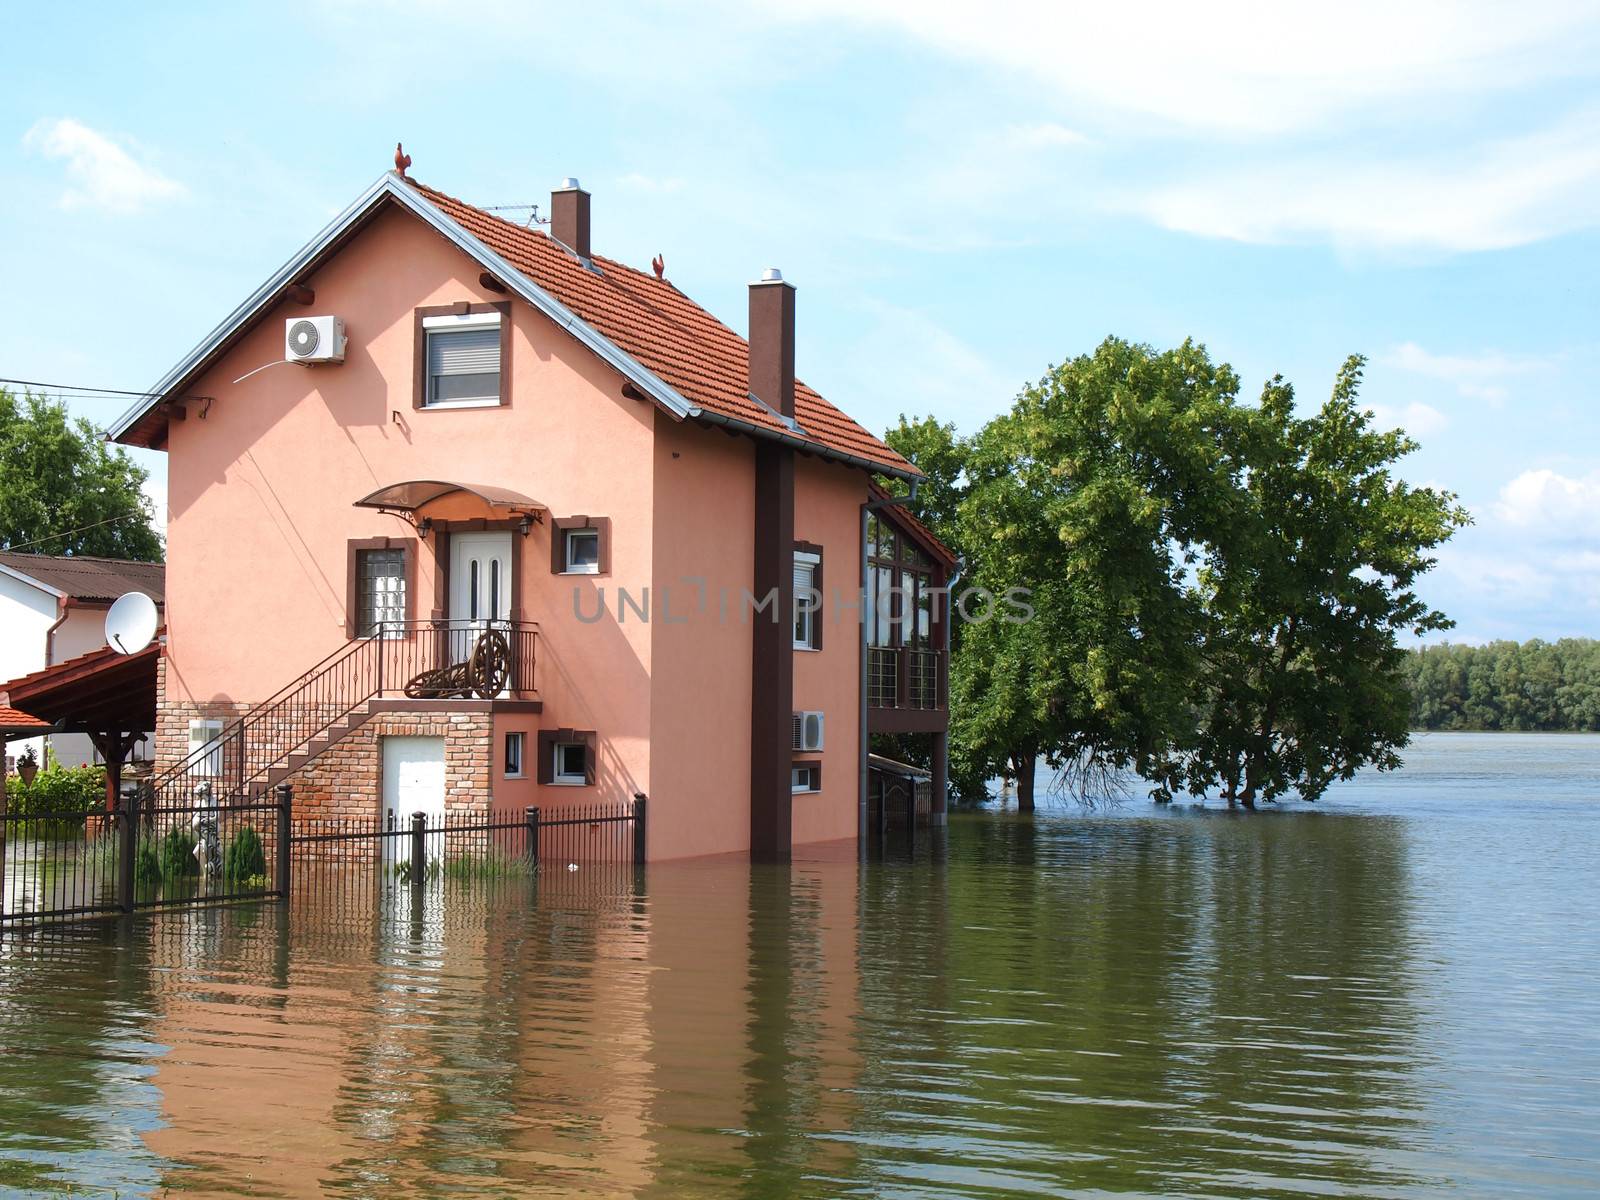 flooded house by nevenm